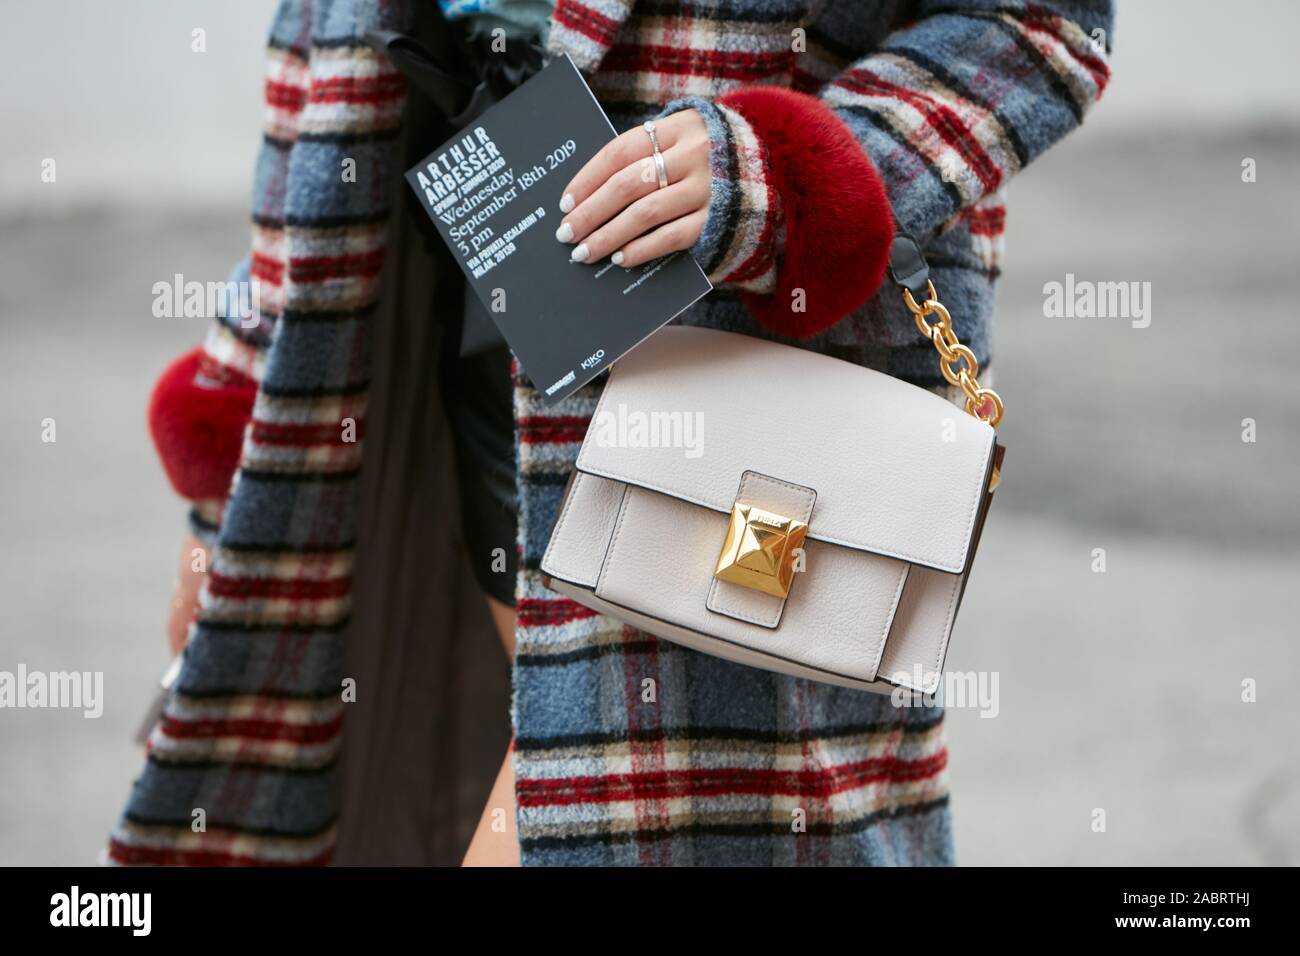 MILAN, ITALY - SEPTEMBER 18, 2019: Woman with beige leather Furla bag and checkered coat with red fur cuffs before Arthur Arbesser fashion show, Milan Stock Photo